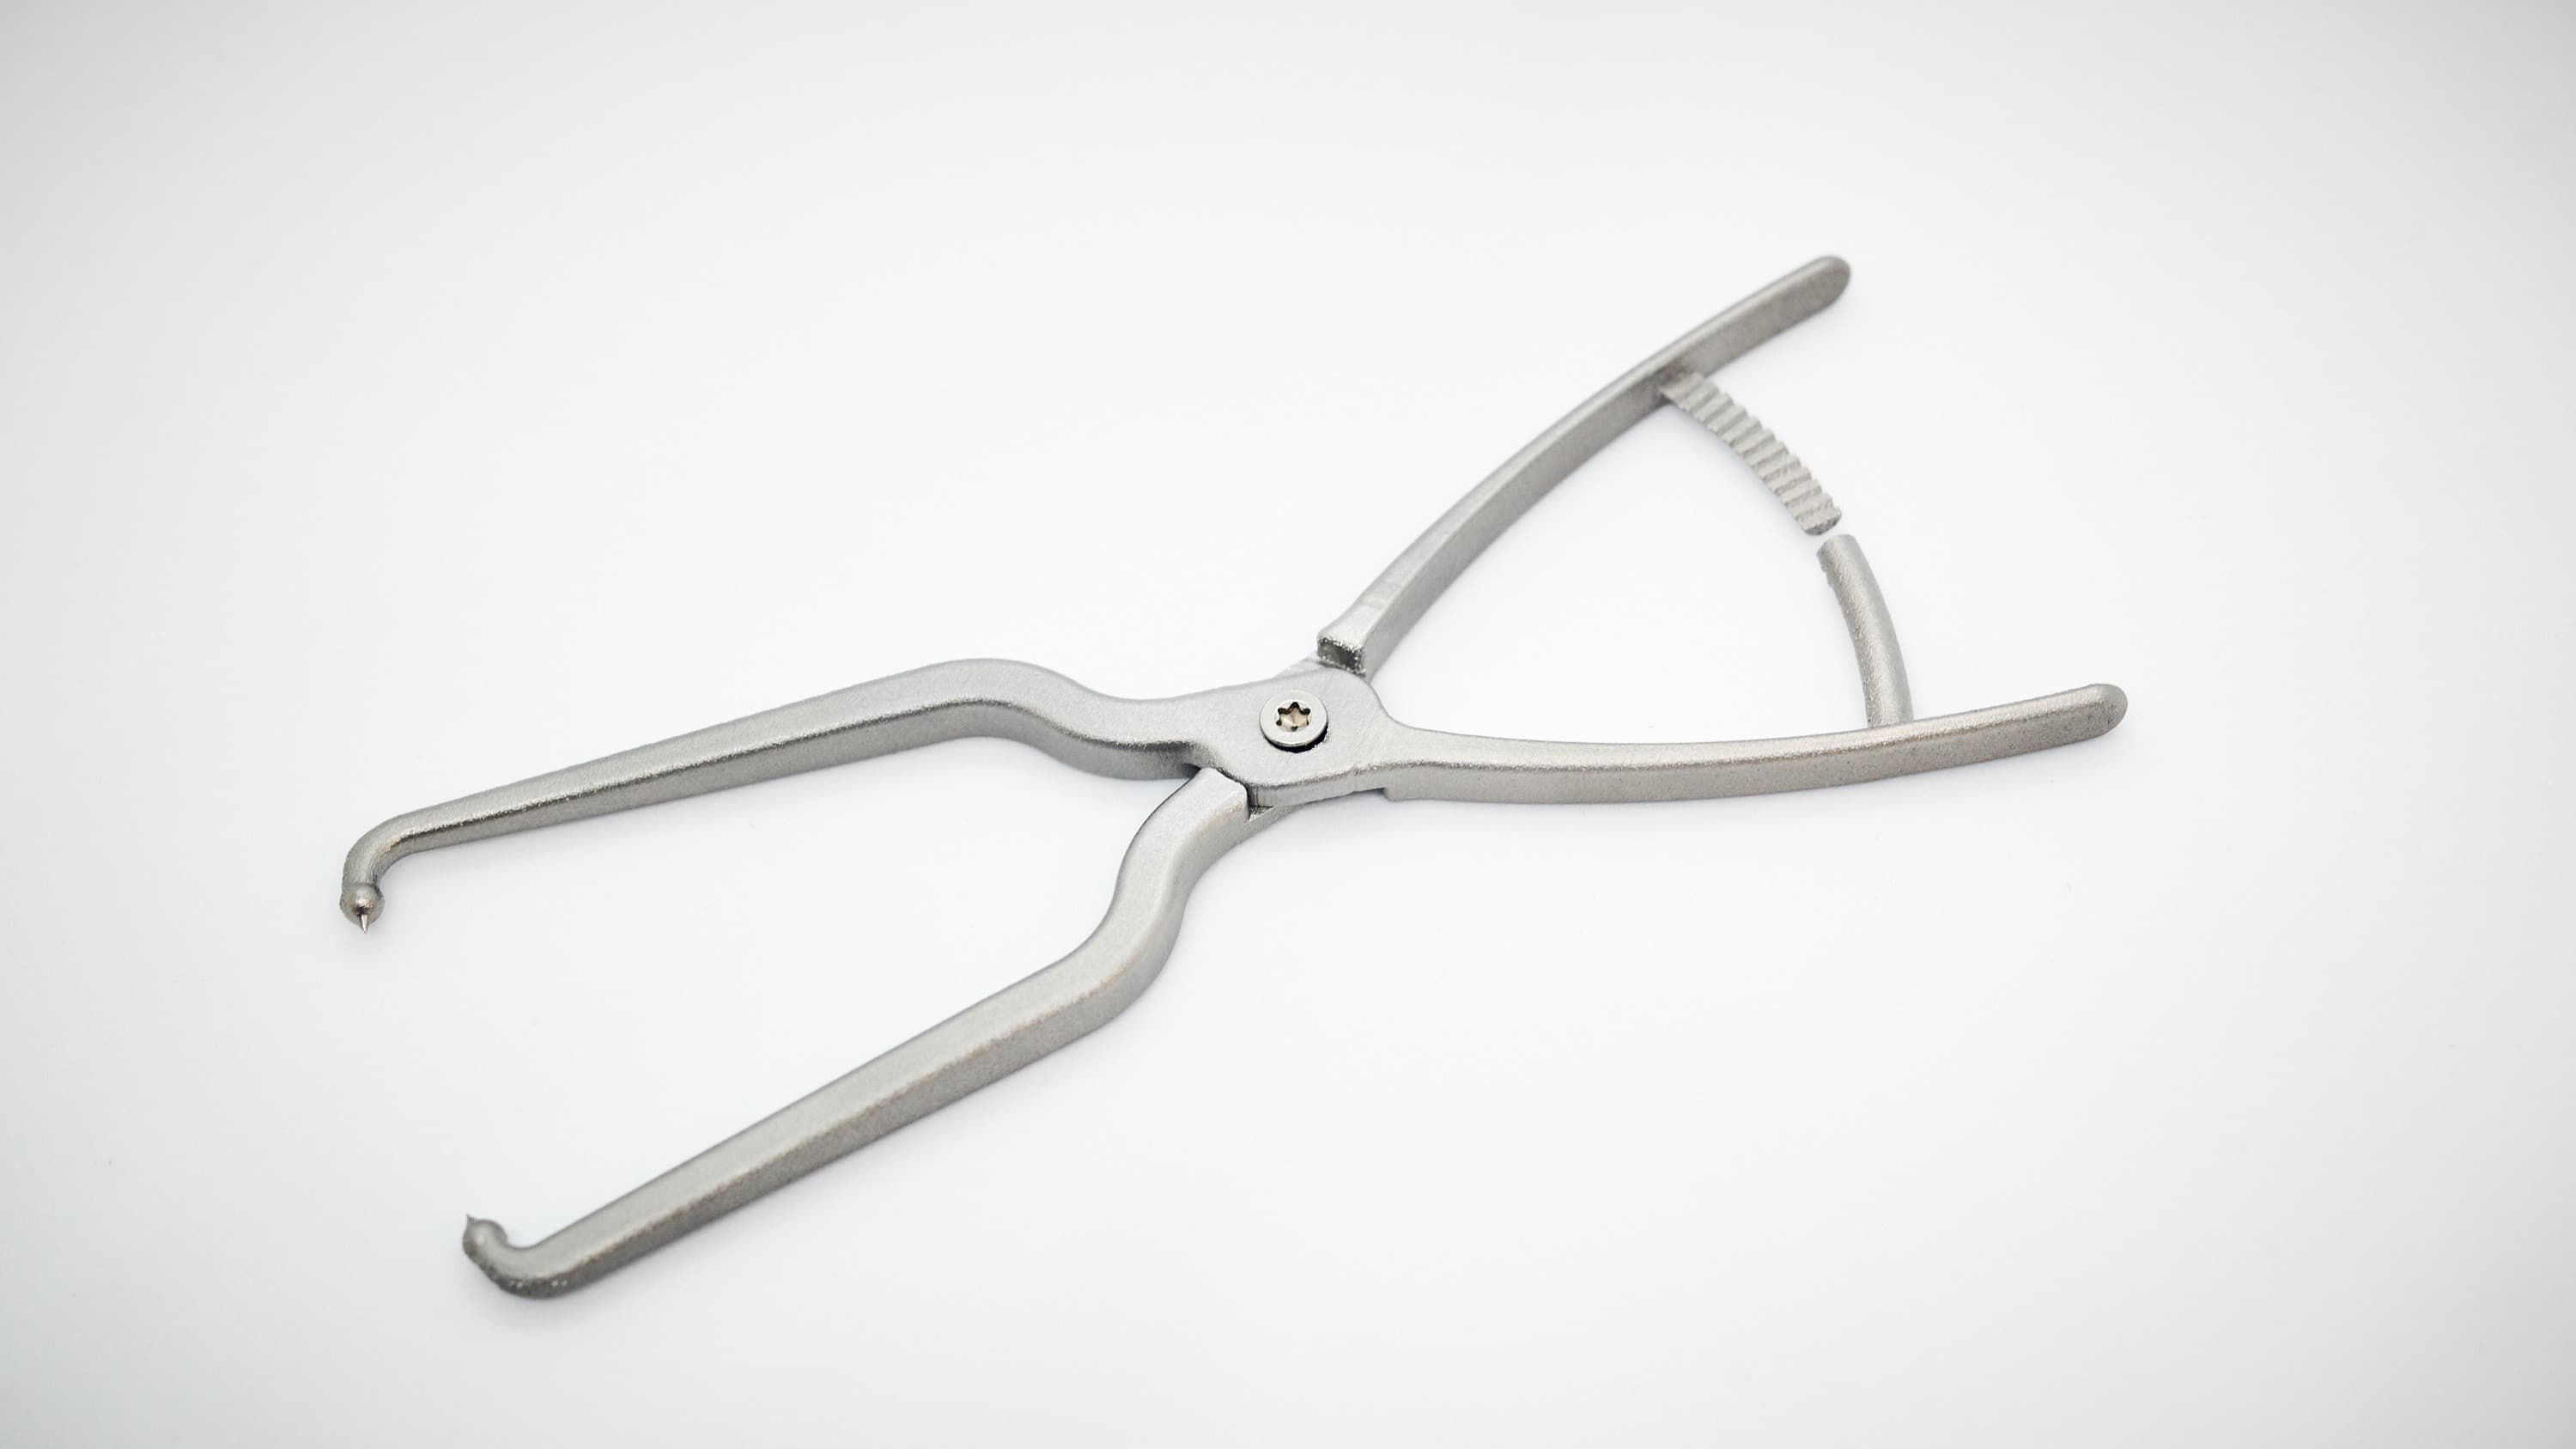 Medical forceps made from 1.4542 / 17-4PH stainless steel using additive manufacturing.